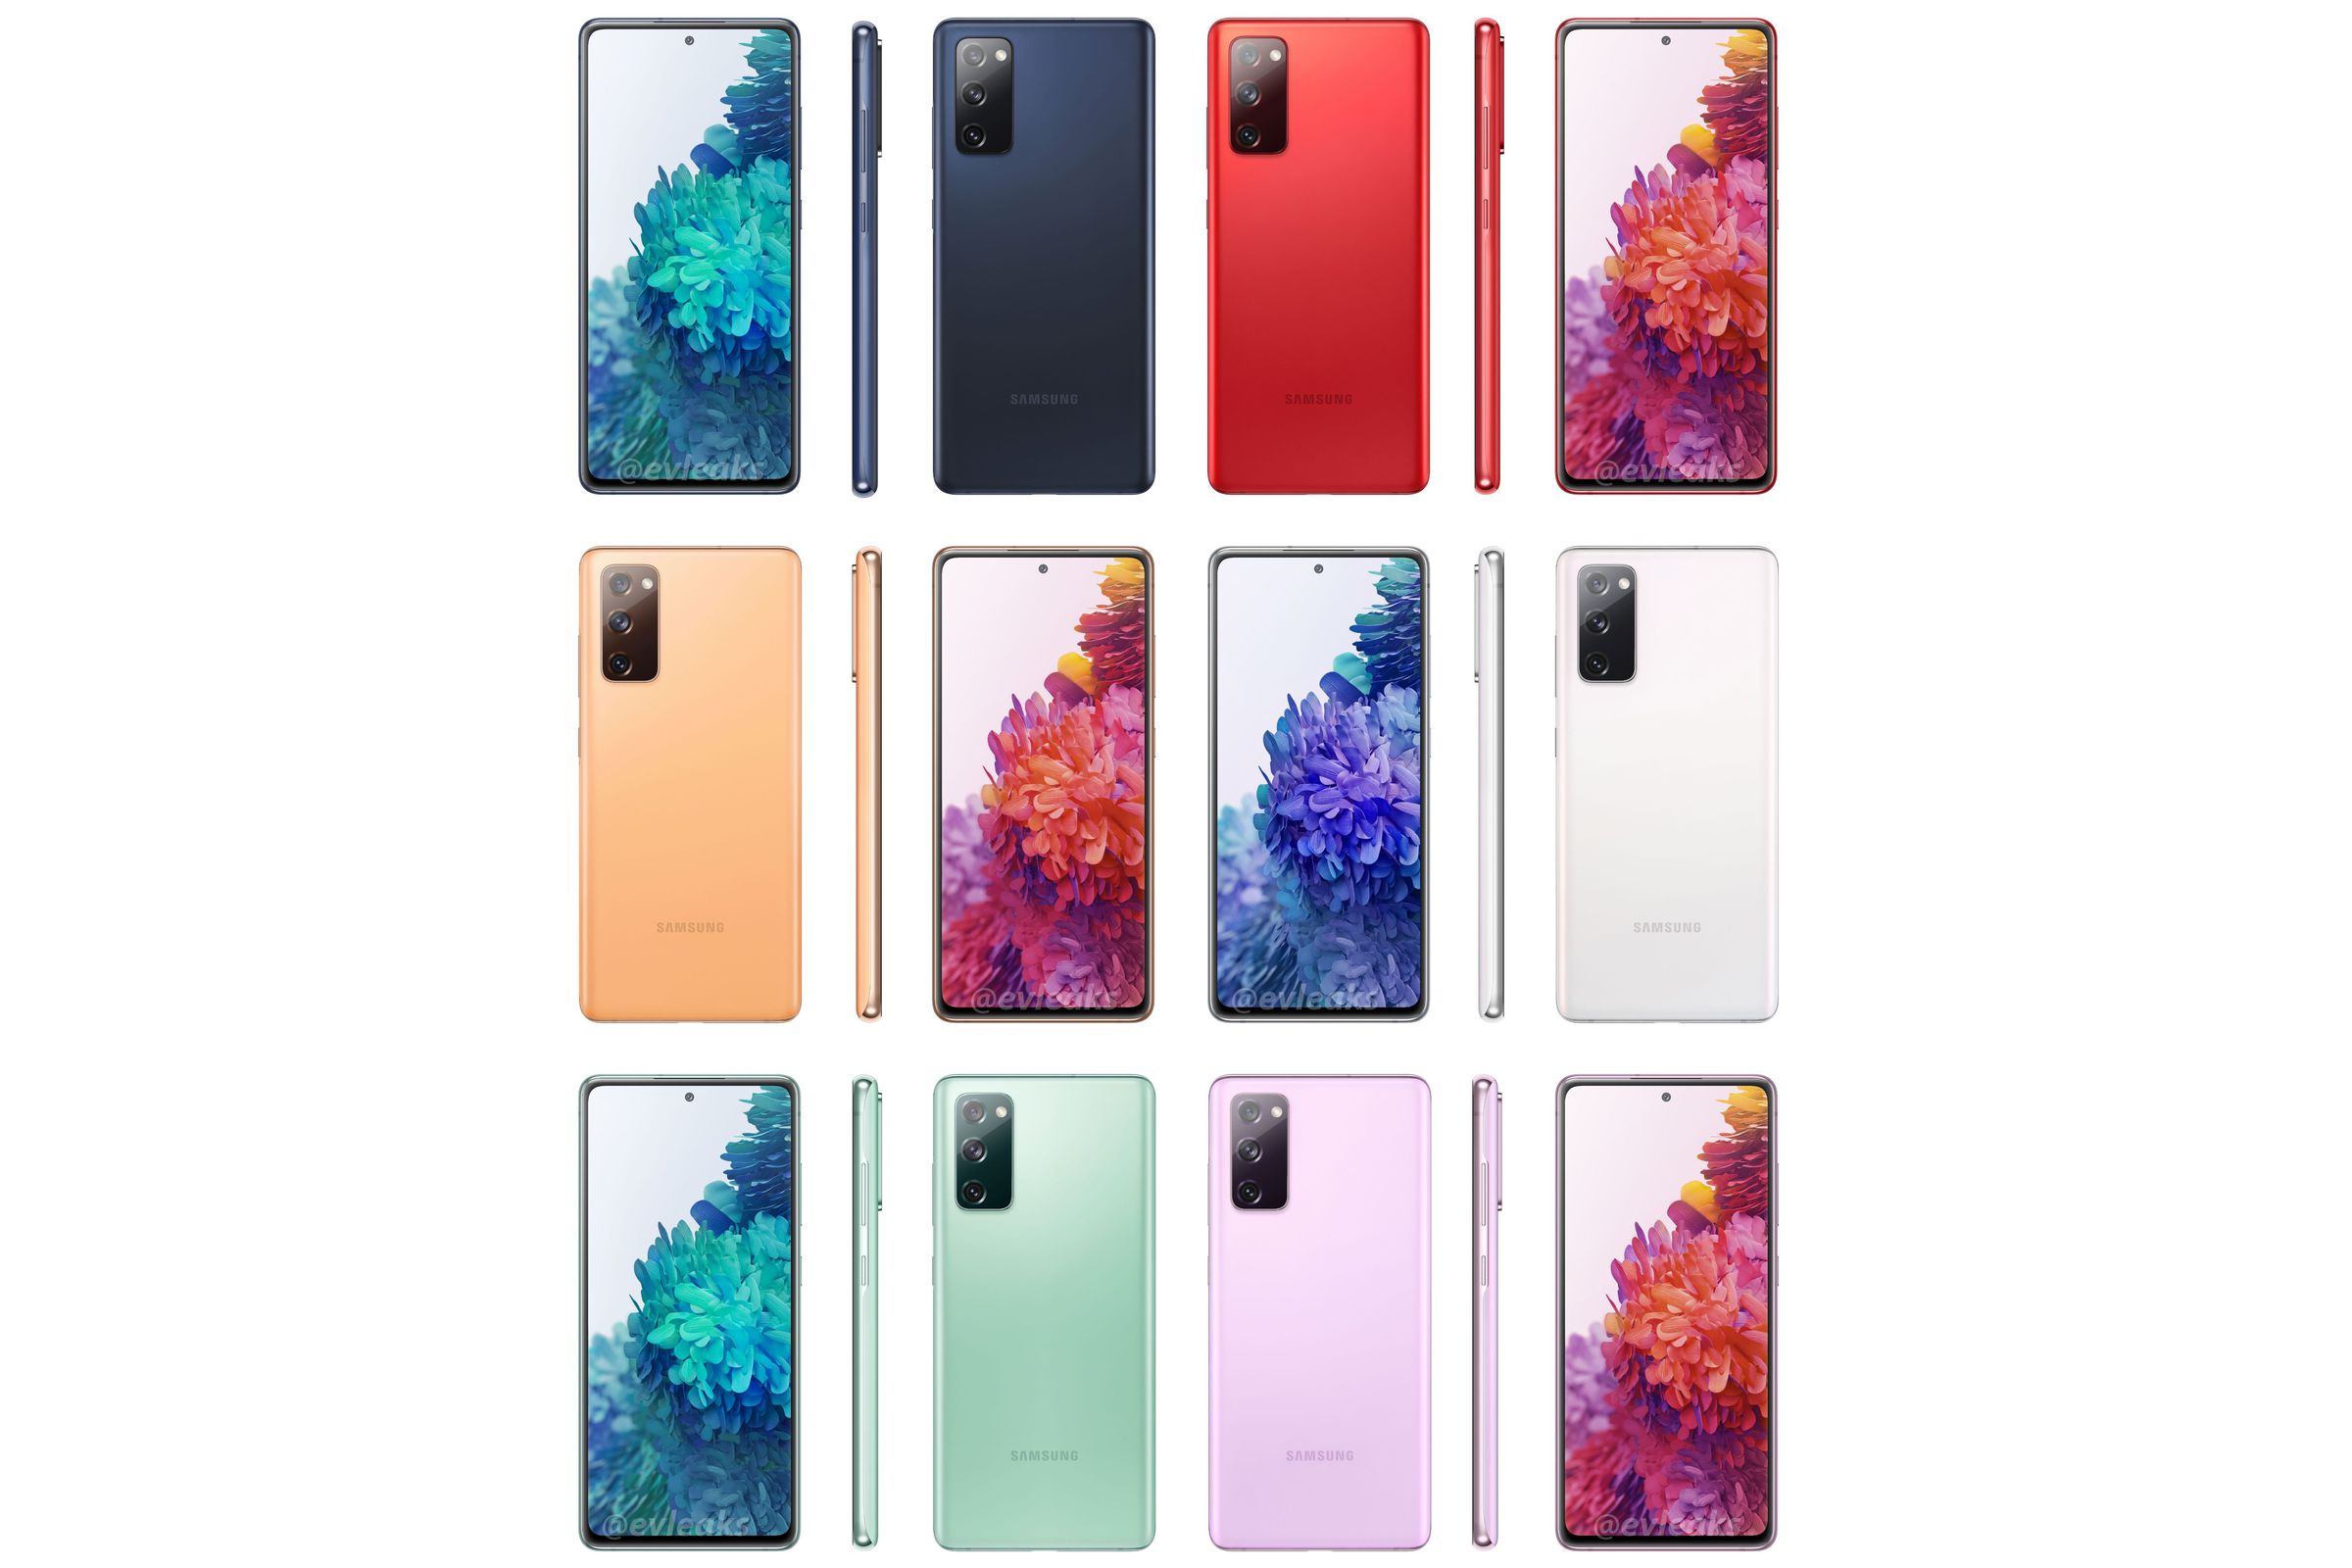 The renders show the phone in six different colors.